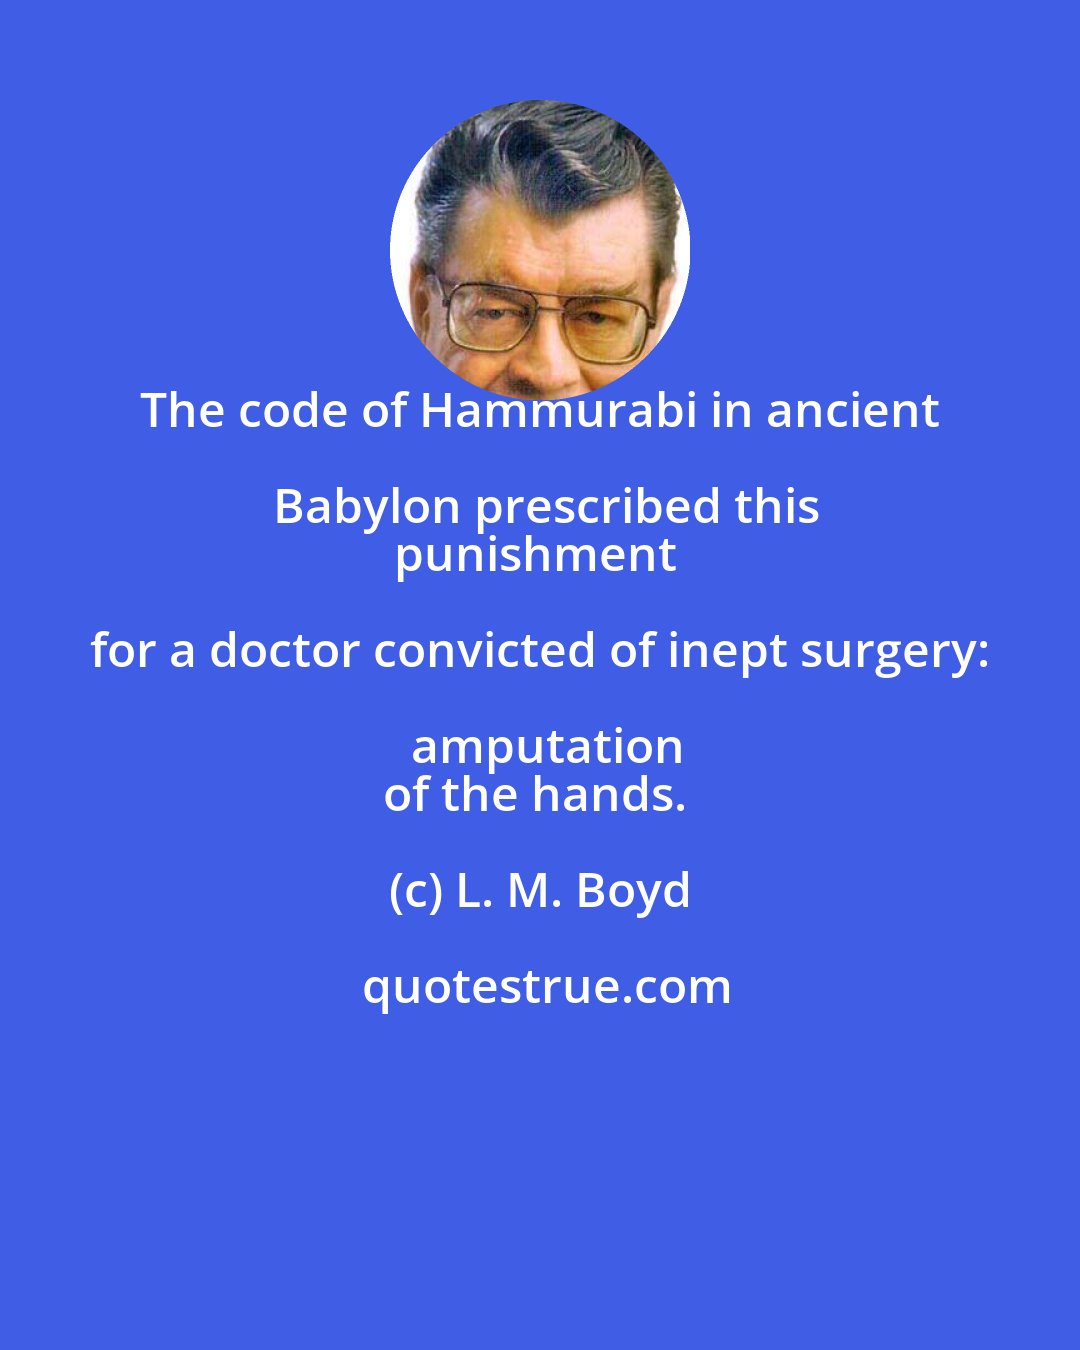 L. M. Boyd: The code of Hammurabi in ancient Babylon prescribed this
punishment for a doctor convicted of inept surgery: amputation
of the hands.